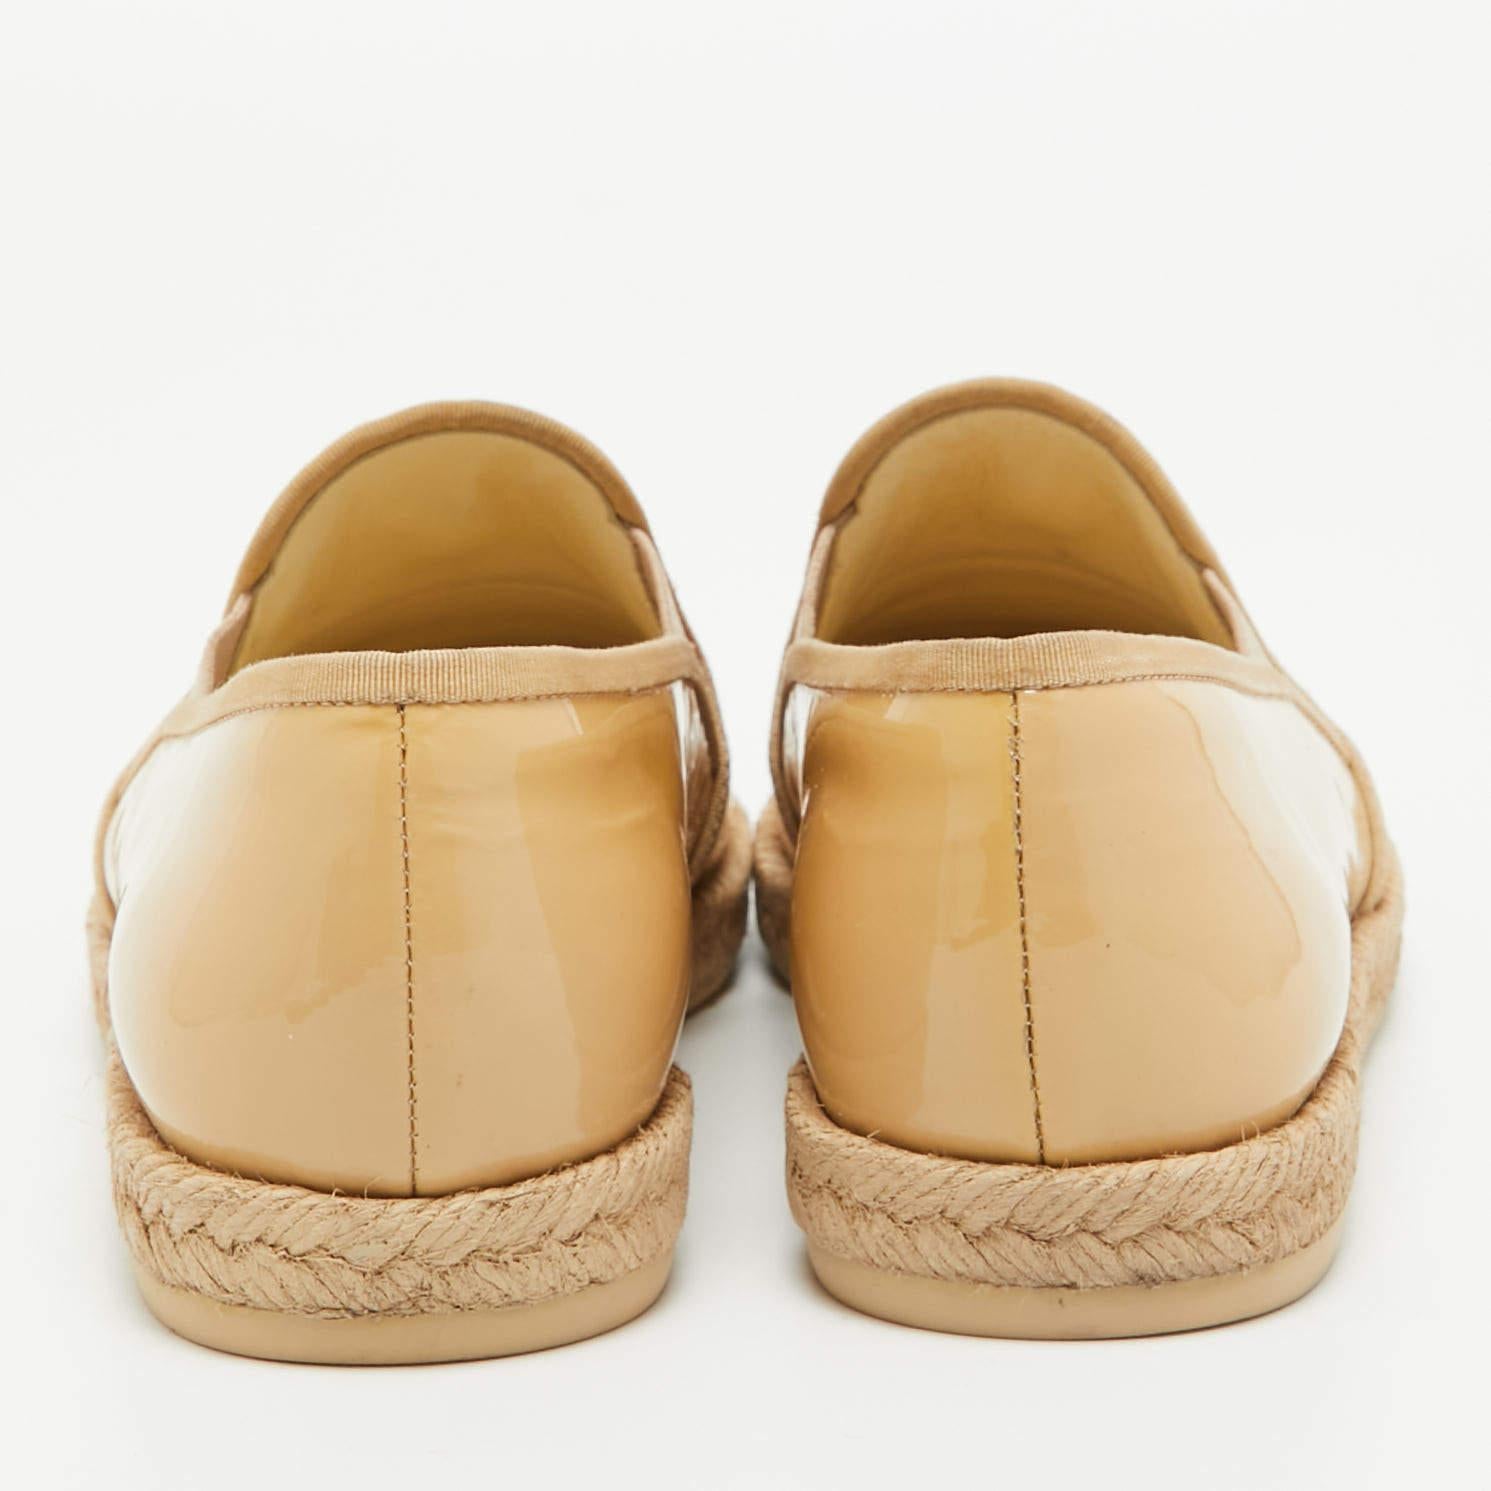 Chanel Beige Patent Leather CC Espadrille Loafers Size 36.5 1